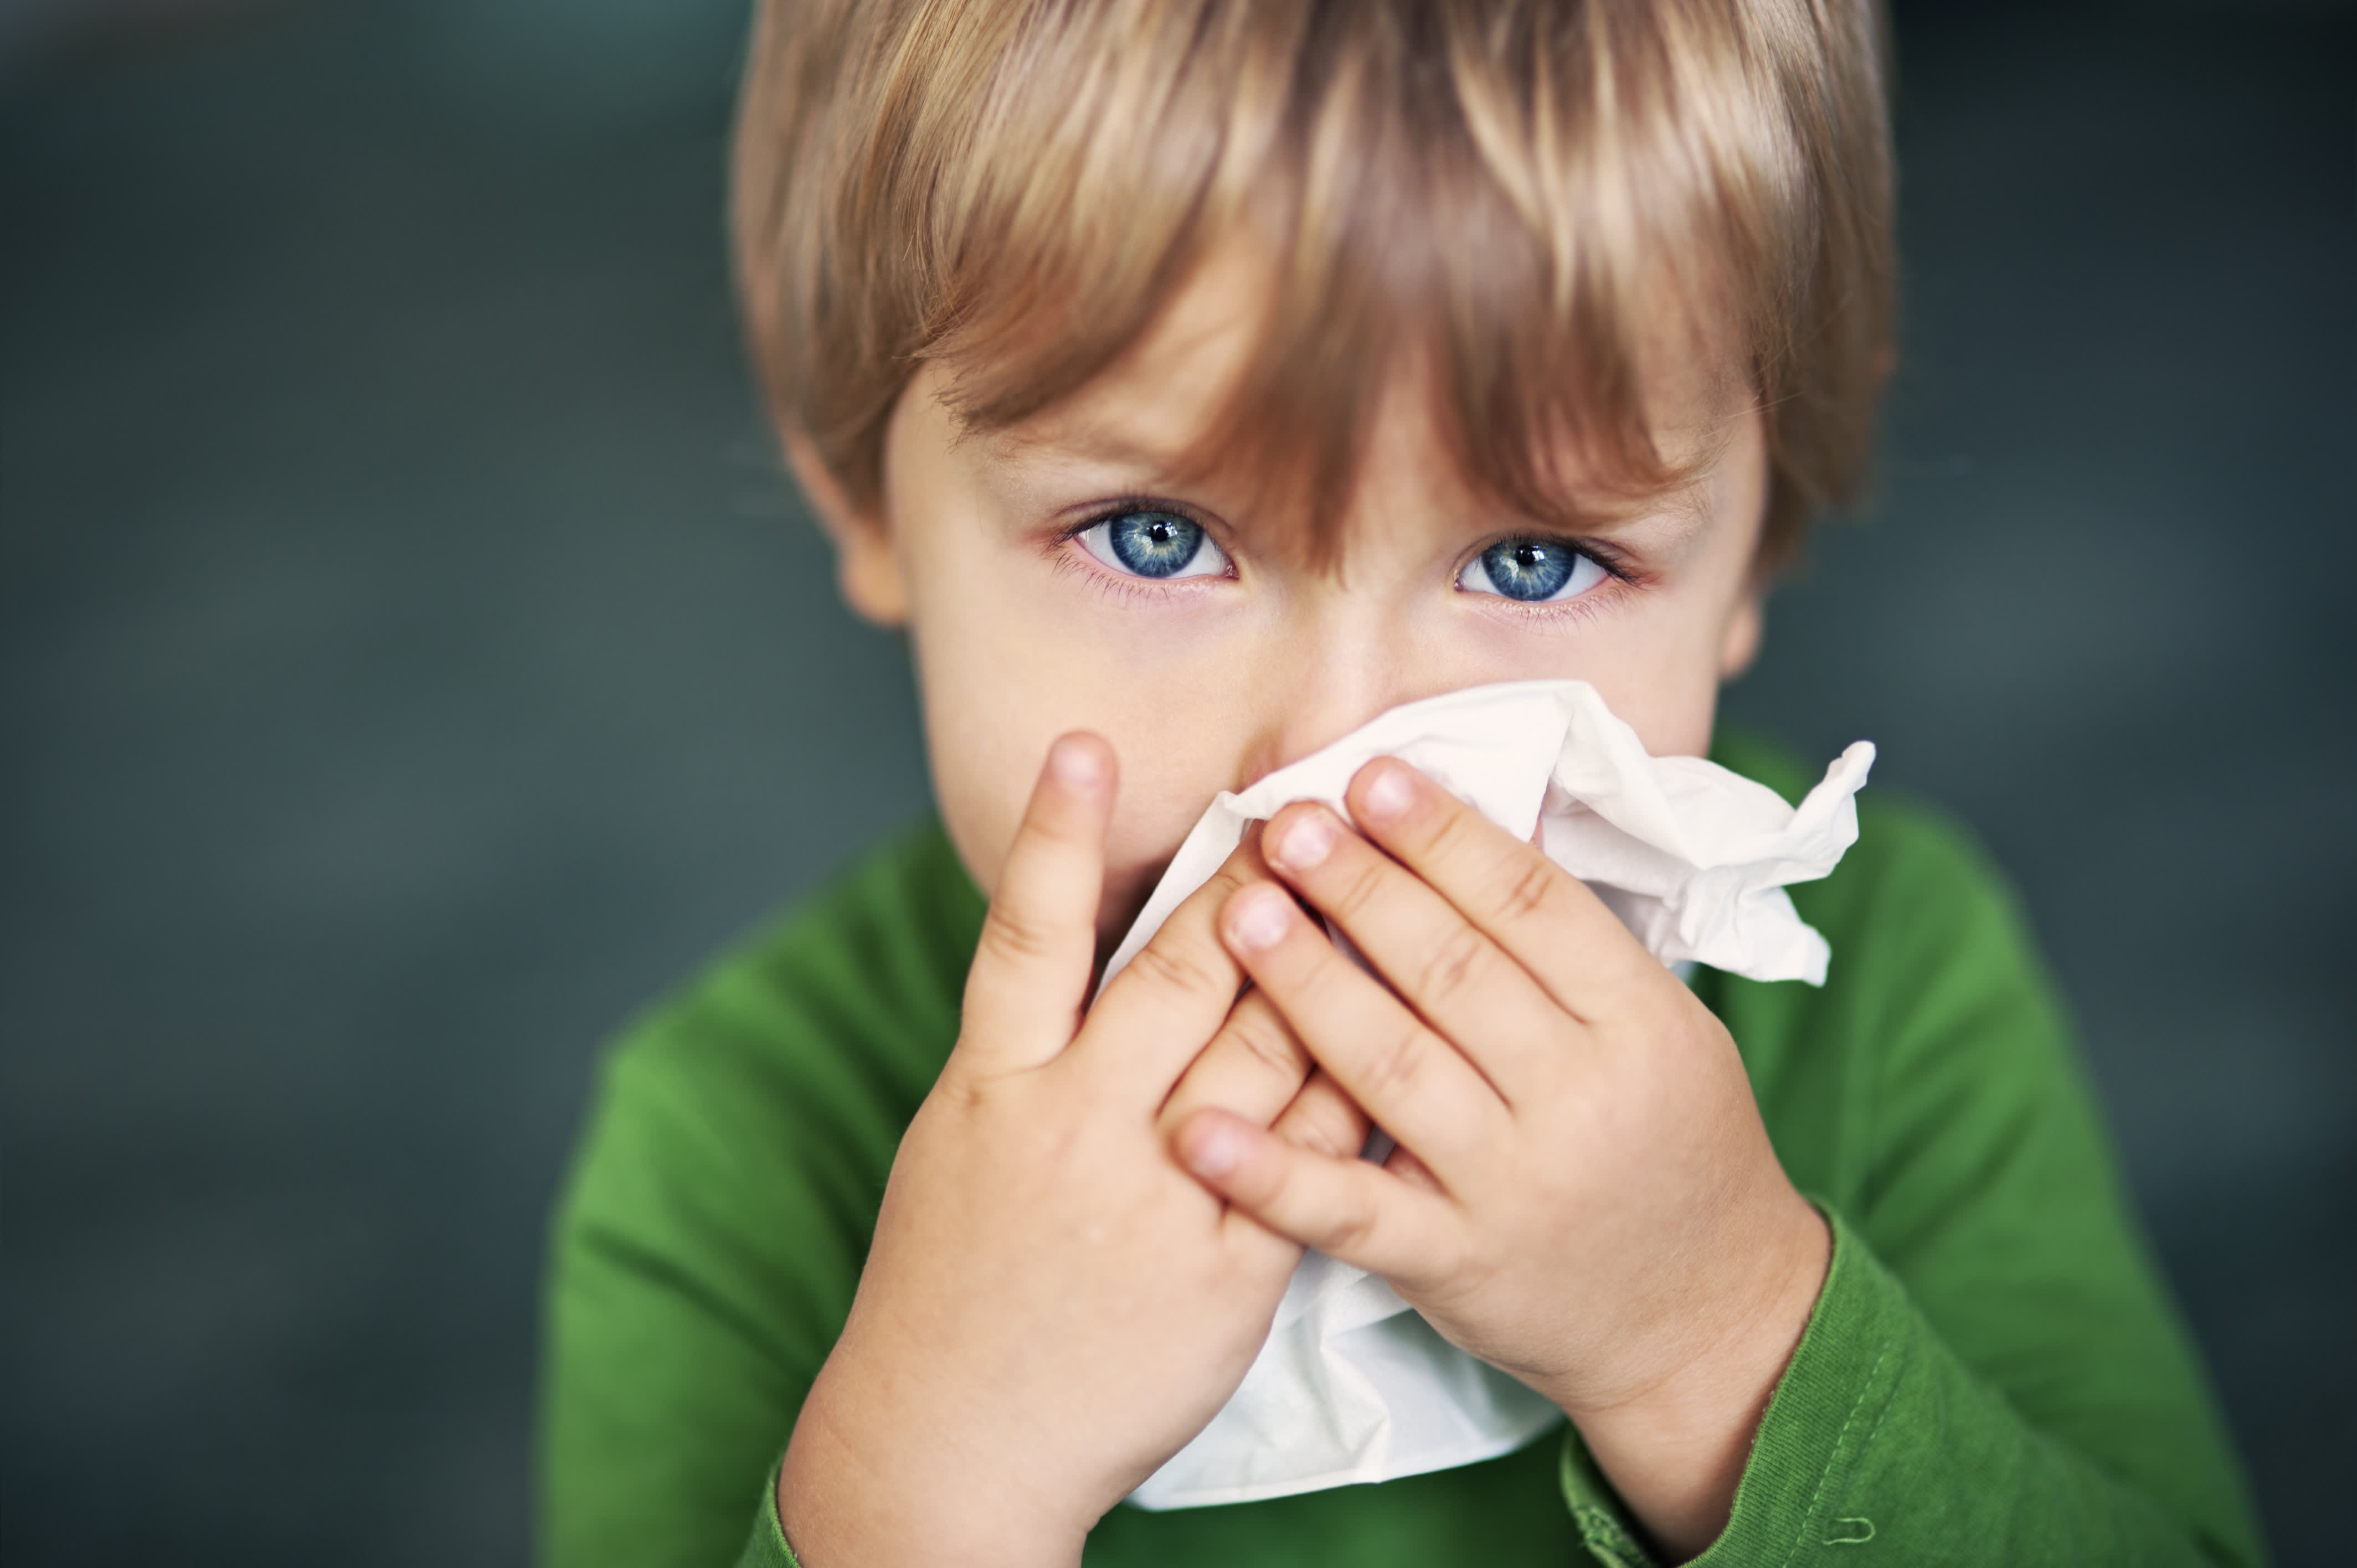 Harvard-trained pediatrician shares 5 things she never does when her ‘own kids’ are sick